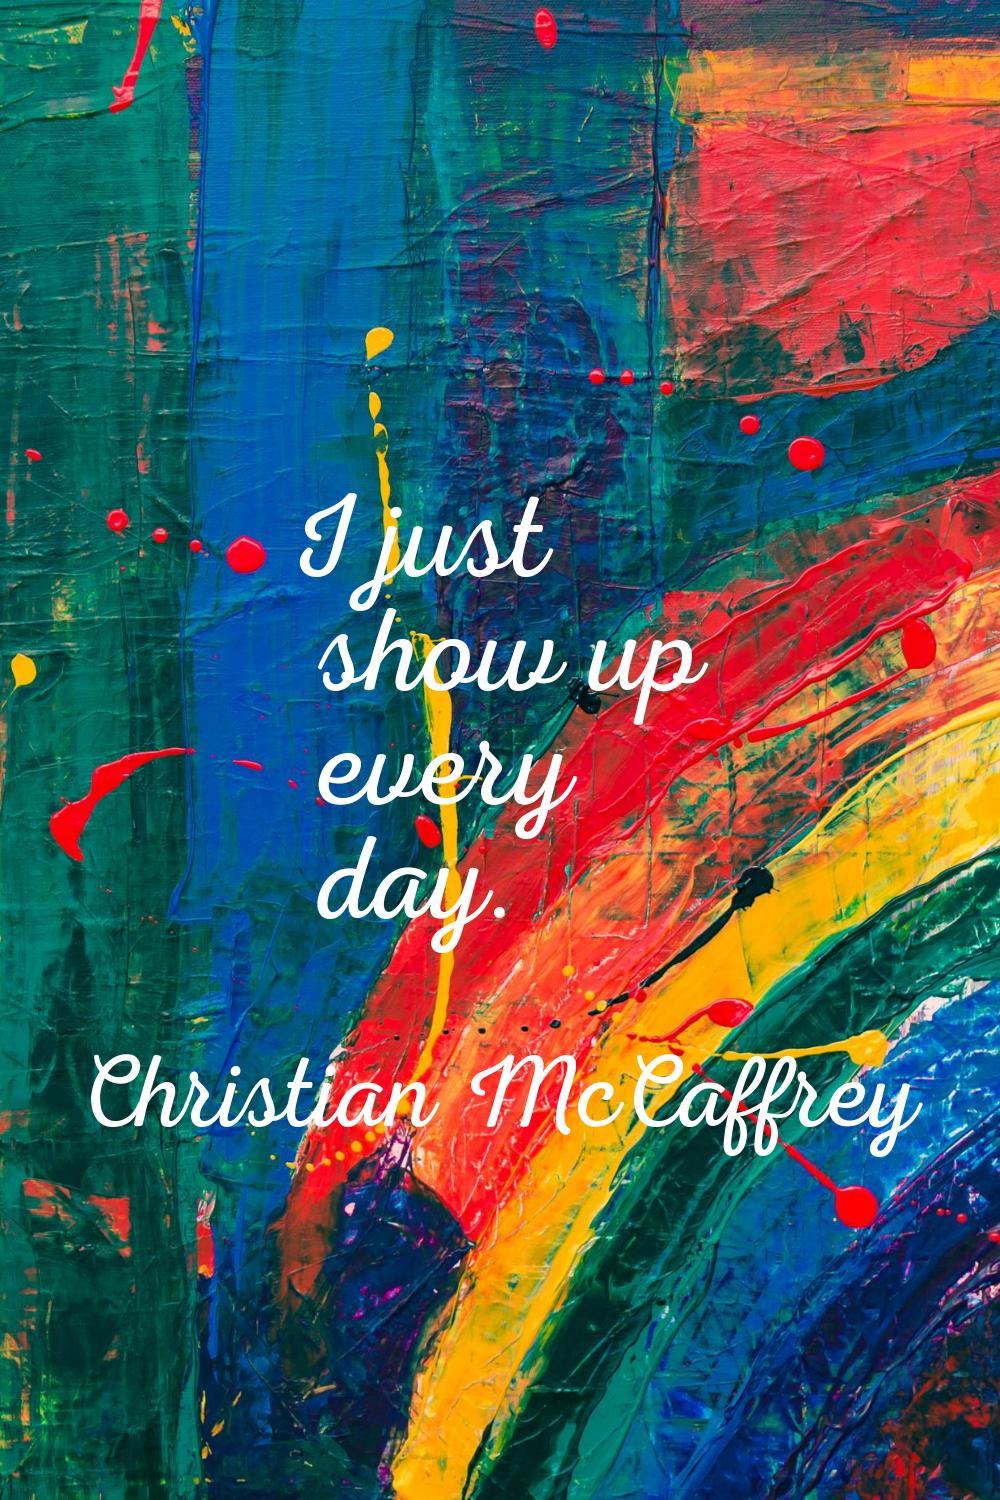 I just show up every day.